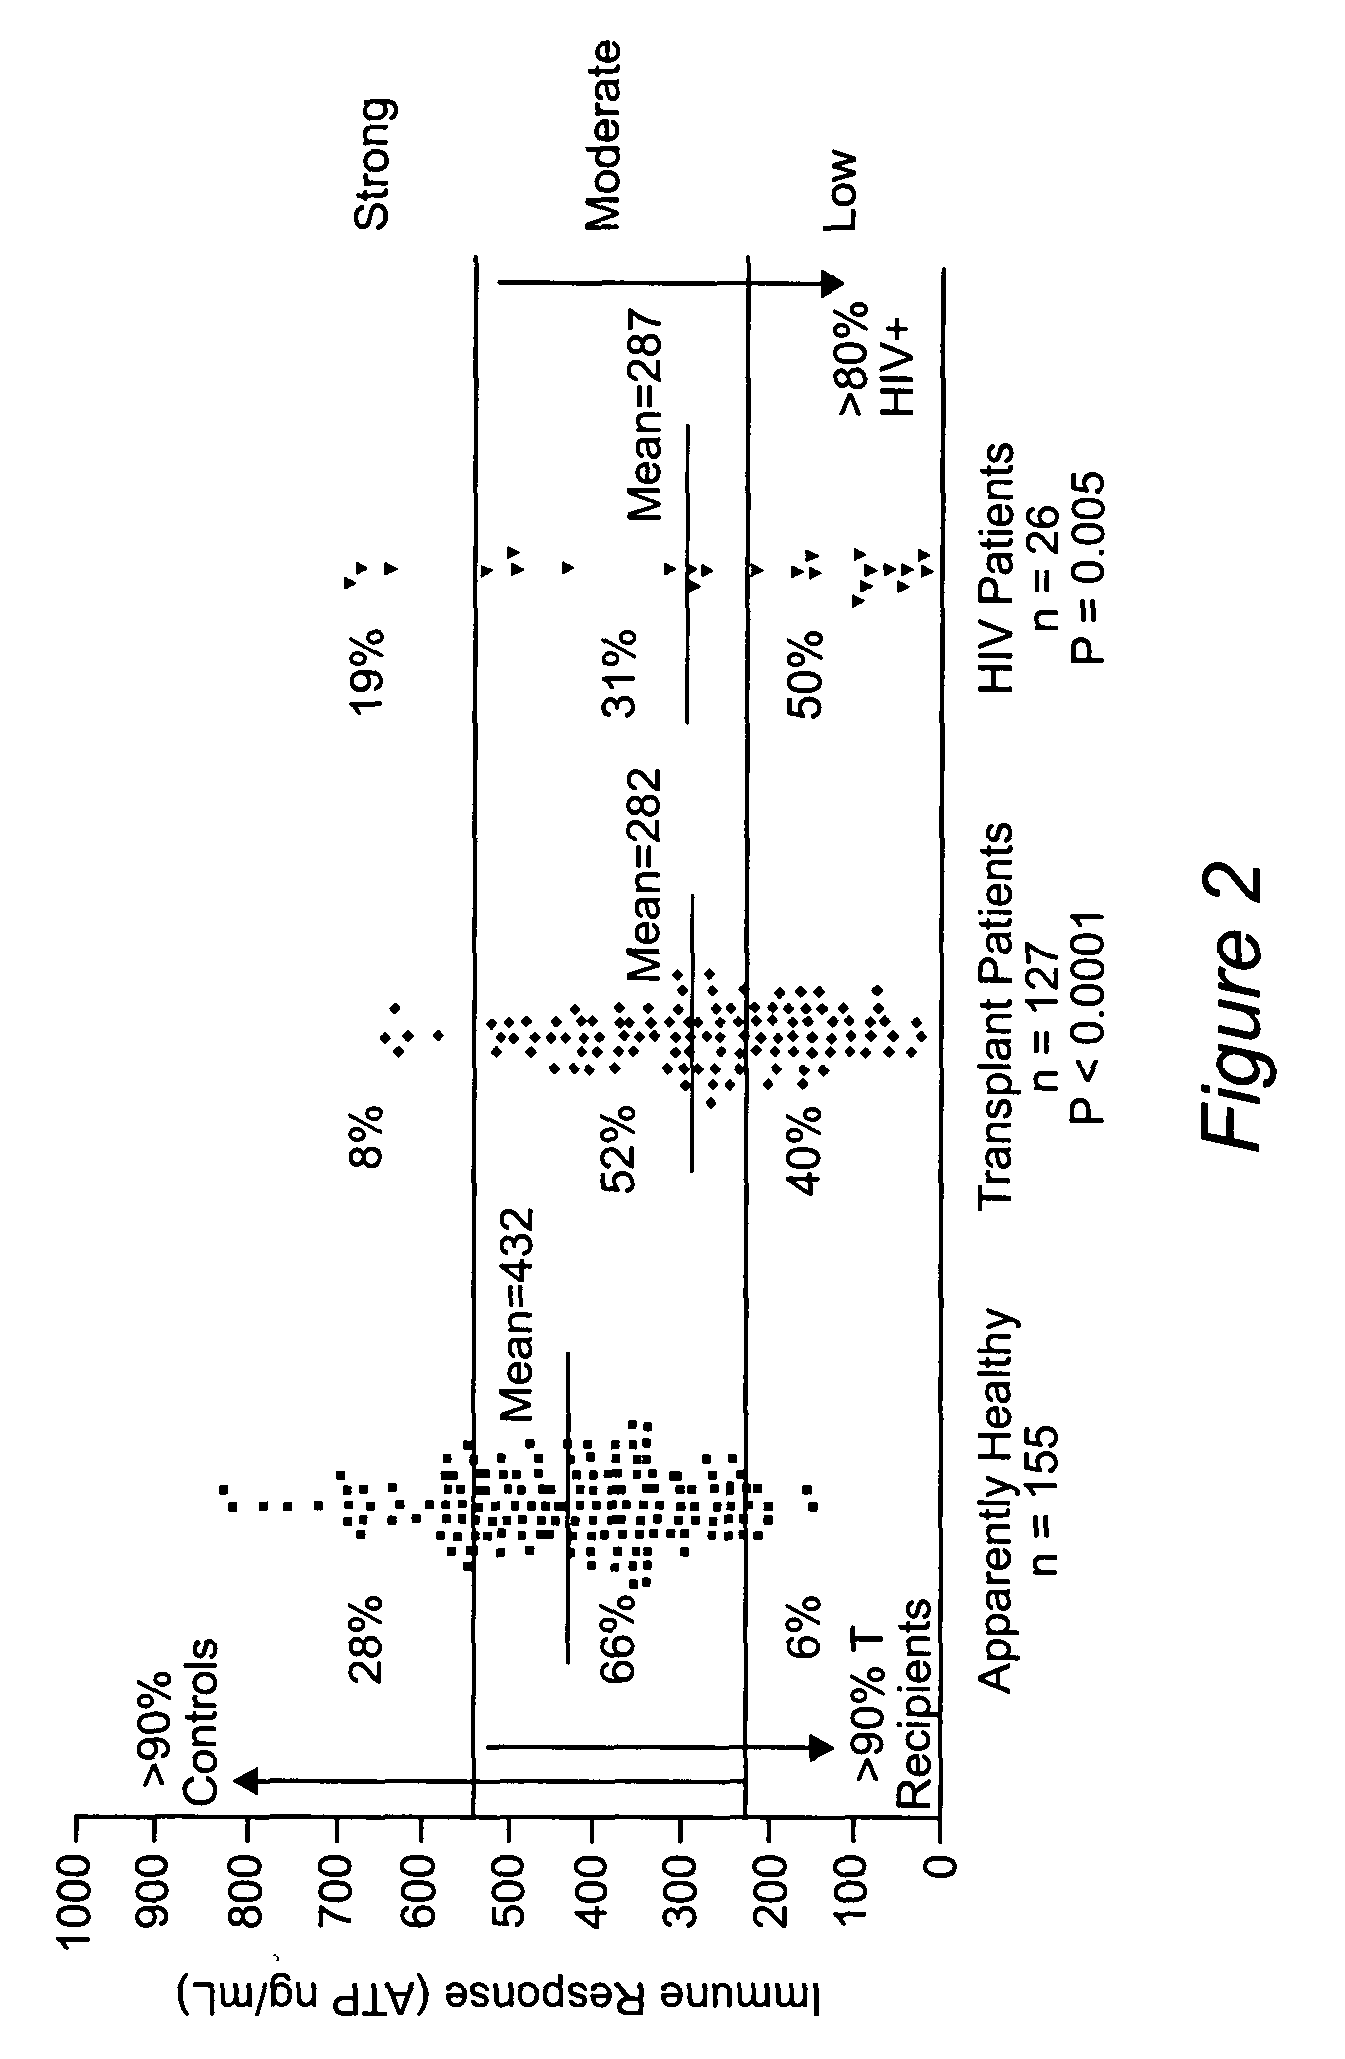 Method for monitoring the immune response and predicting clinical outcomes in transplant recipients